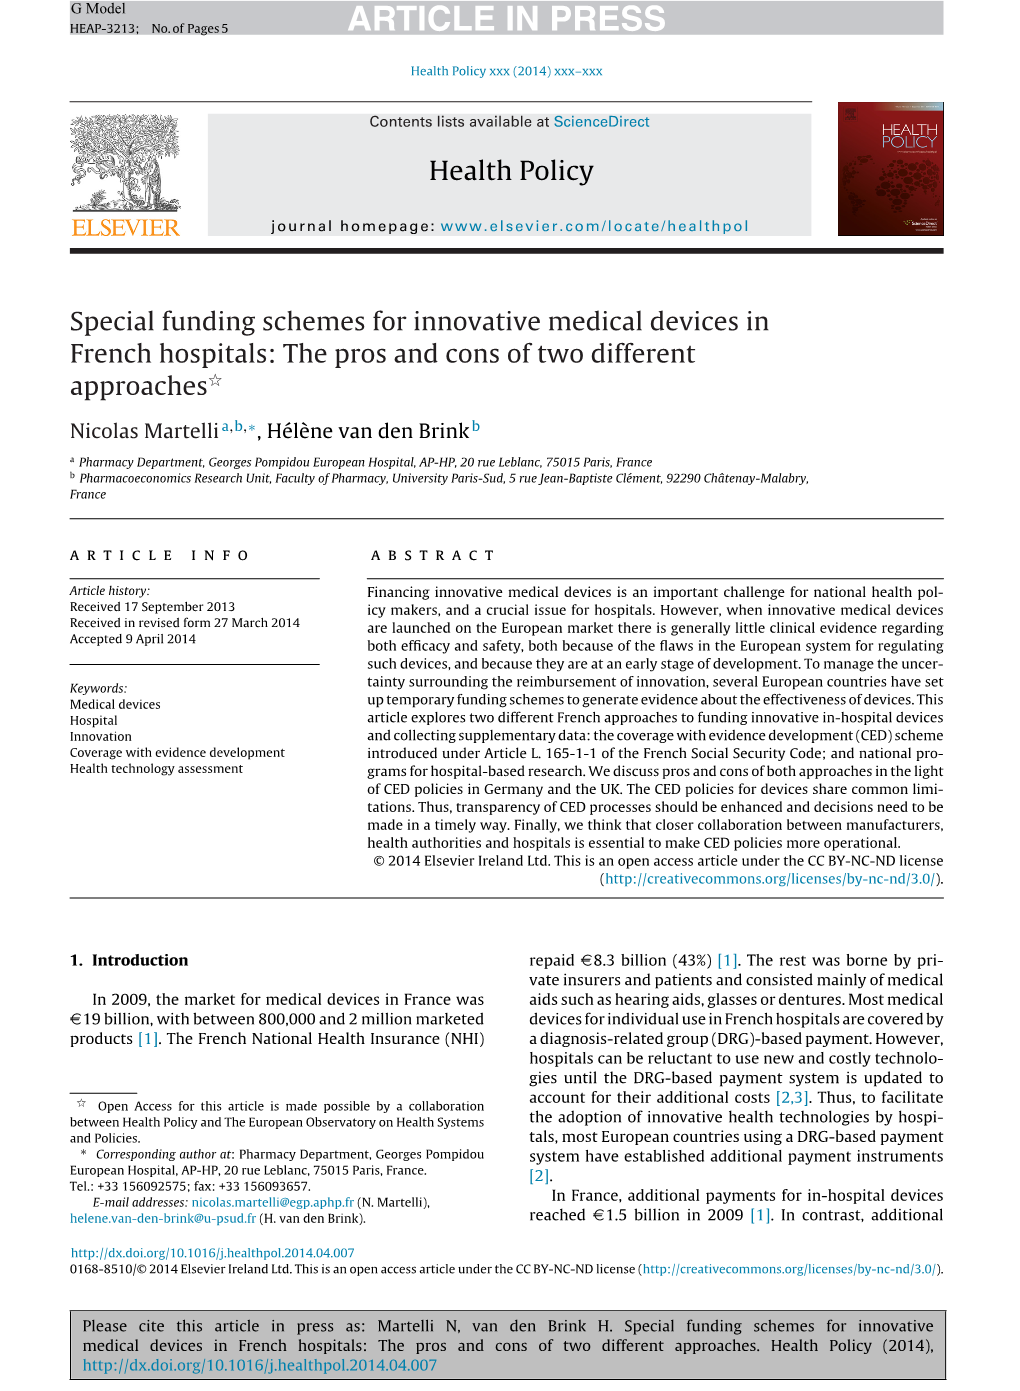 Special Funding Schemes for Innovative Medical Devices in French Hospitals: the Pros and Cons of Two Different Approaches